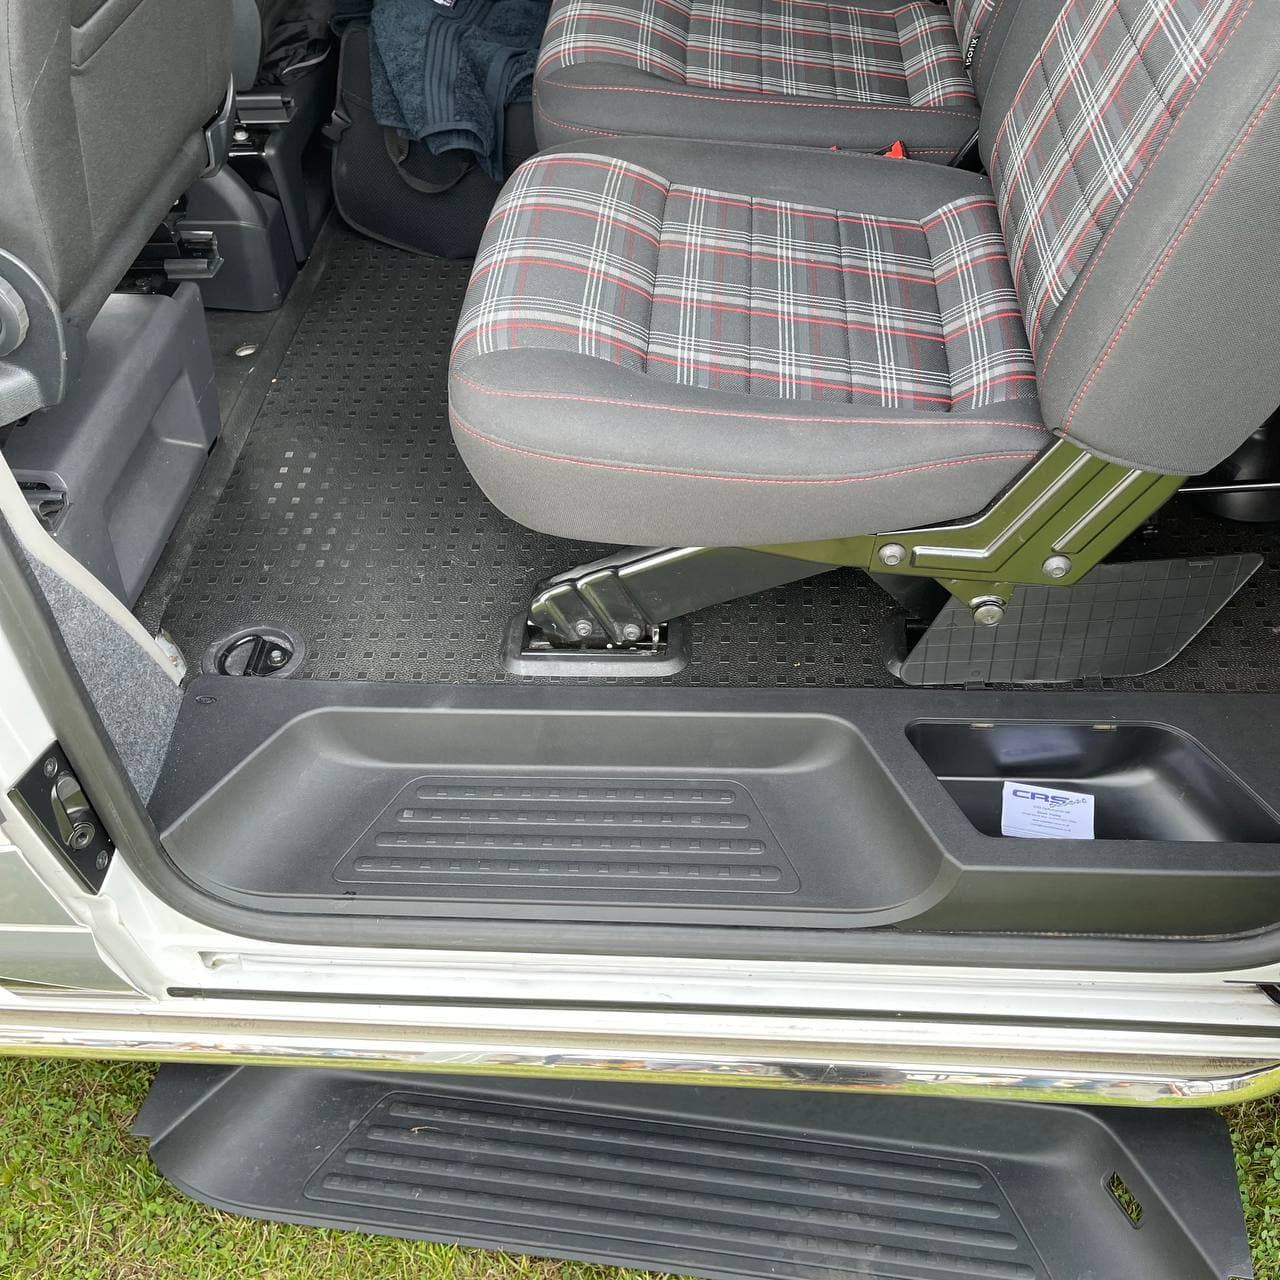 VW T5, T5.1 Transporter Side Loading Door Step V3 17mm Extra Deep with Storage Compartment (B-Grade)